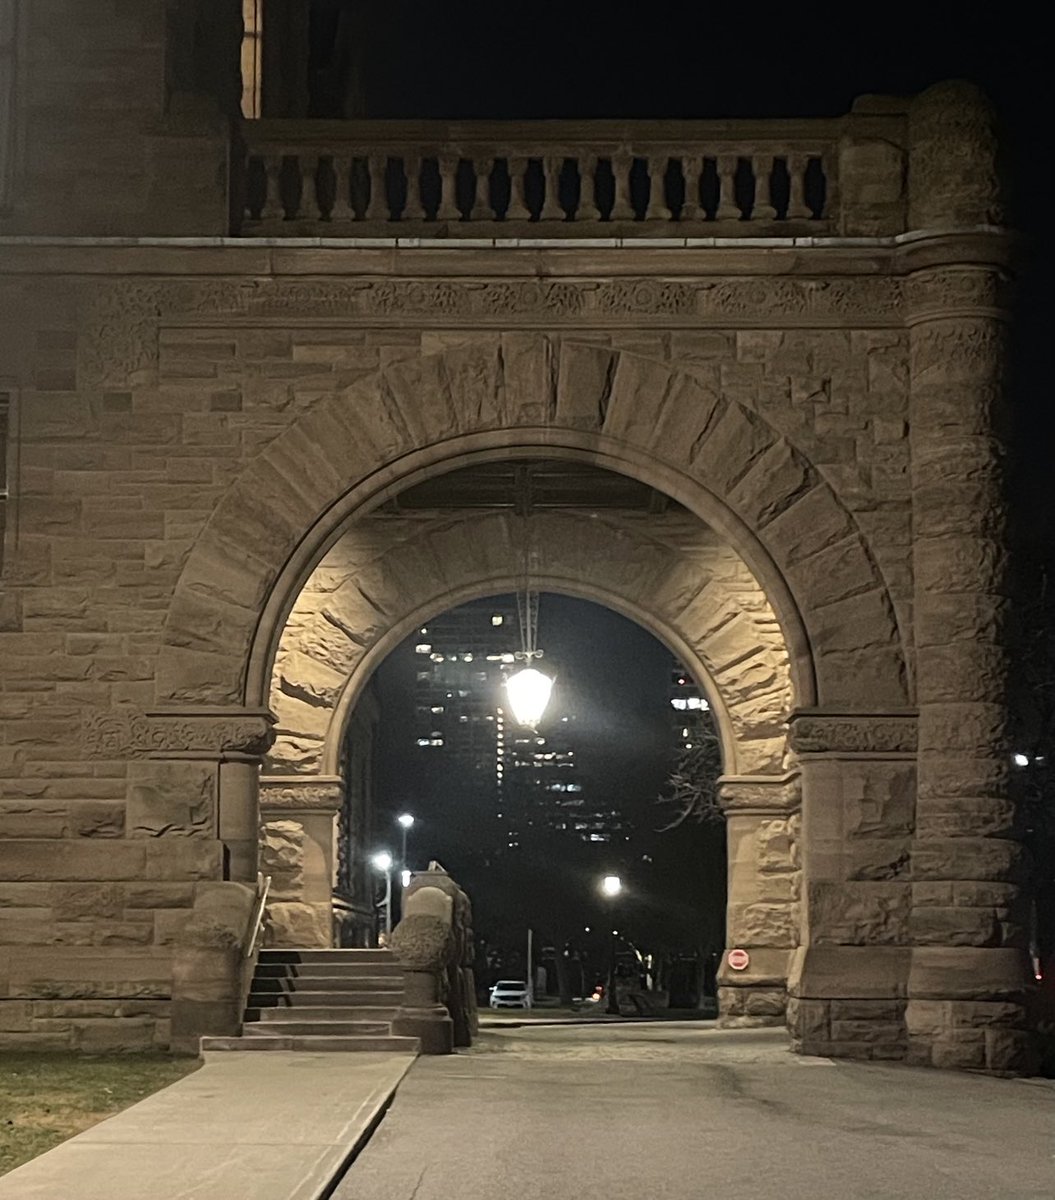 The Legislative Assembly of Ontario’s Richardson Romanesque architecture style includes many arches, including this one near our East Door. Each arch has a keystone at its apex (the last stone laid, and the one that bears the weight). We resume sitting tomorrow morning.